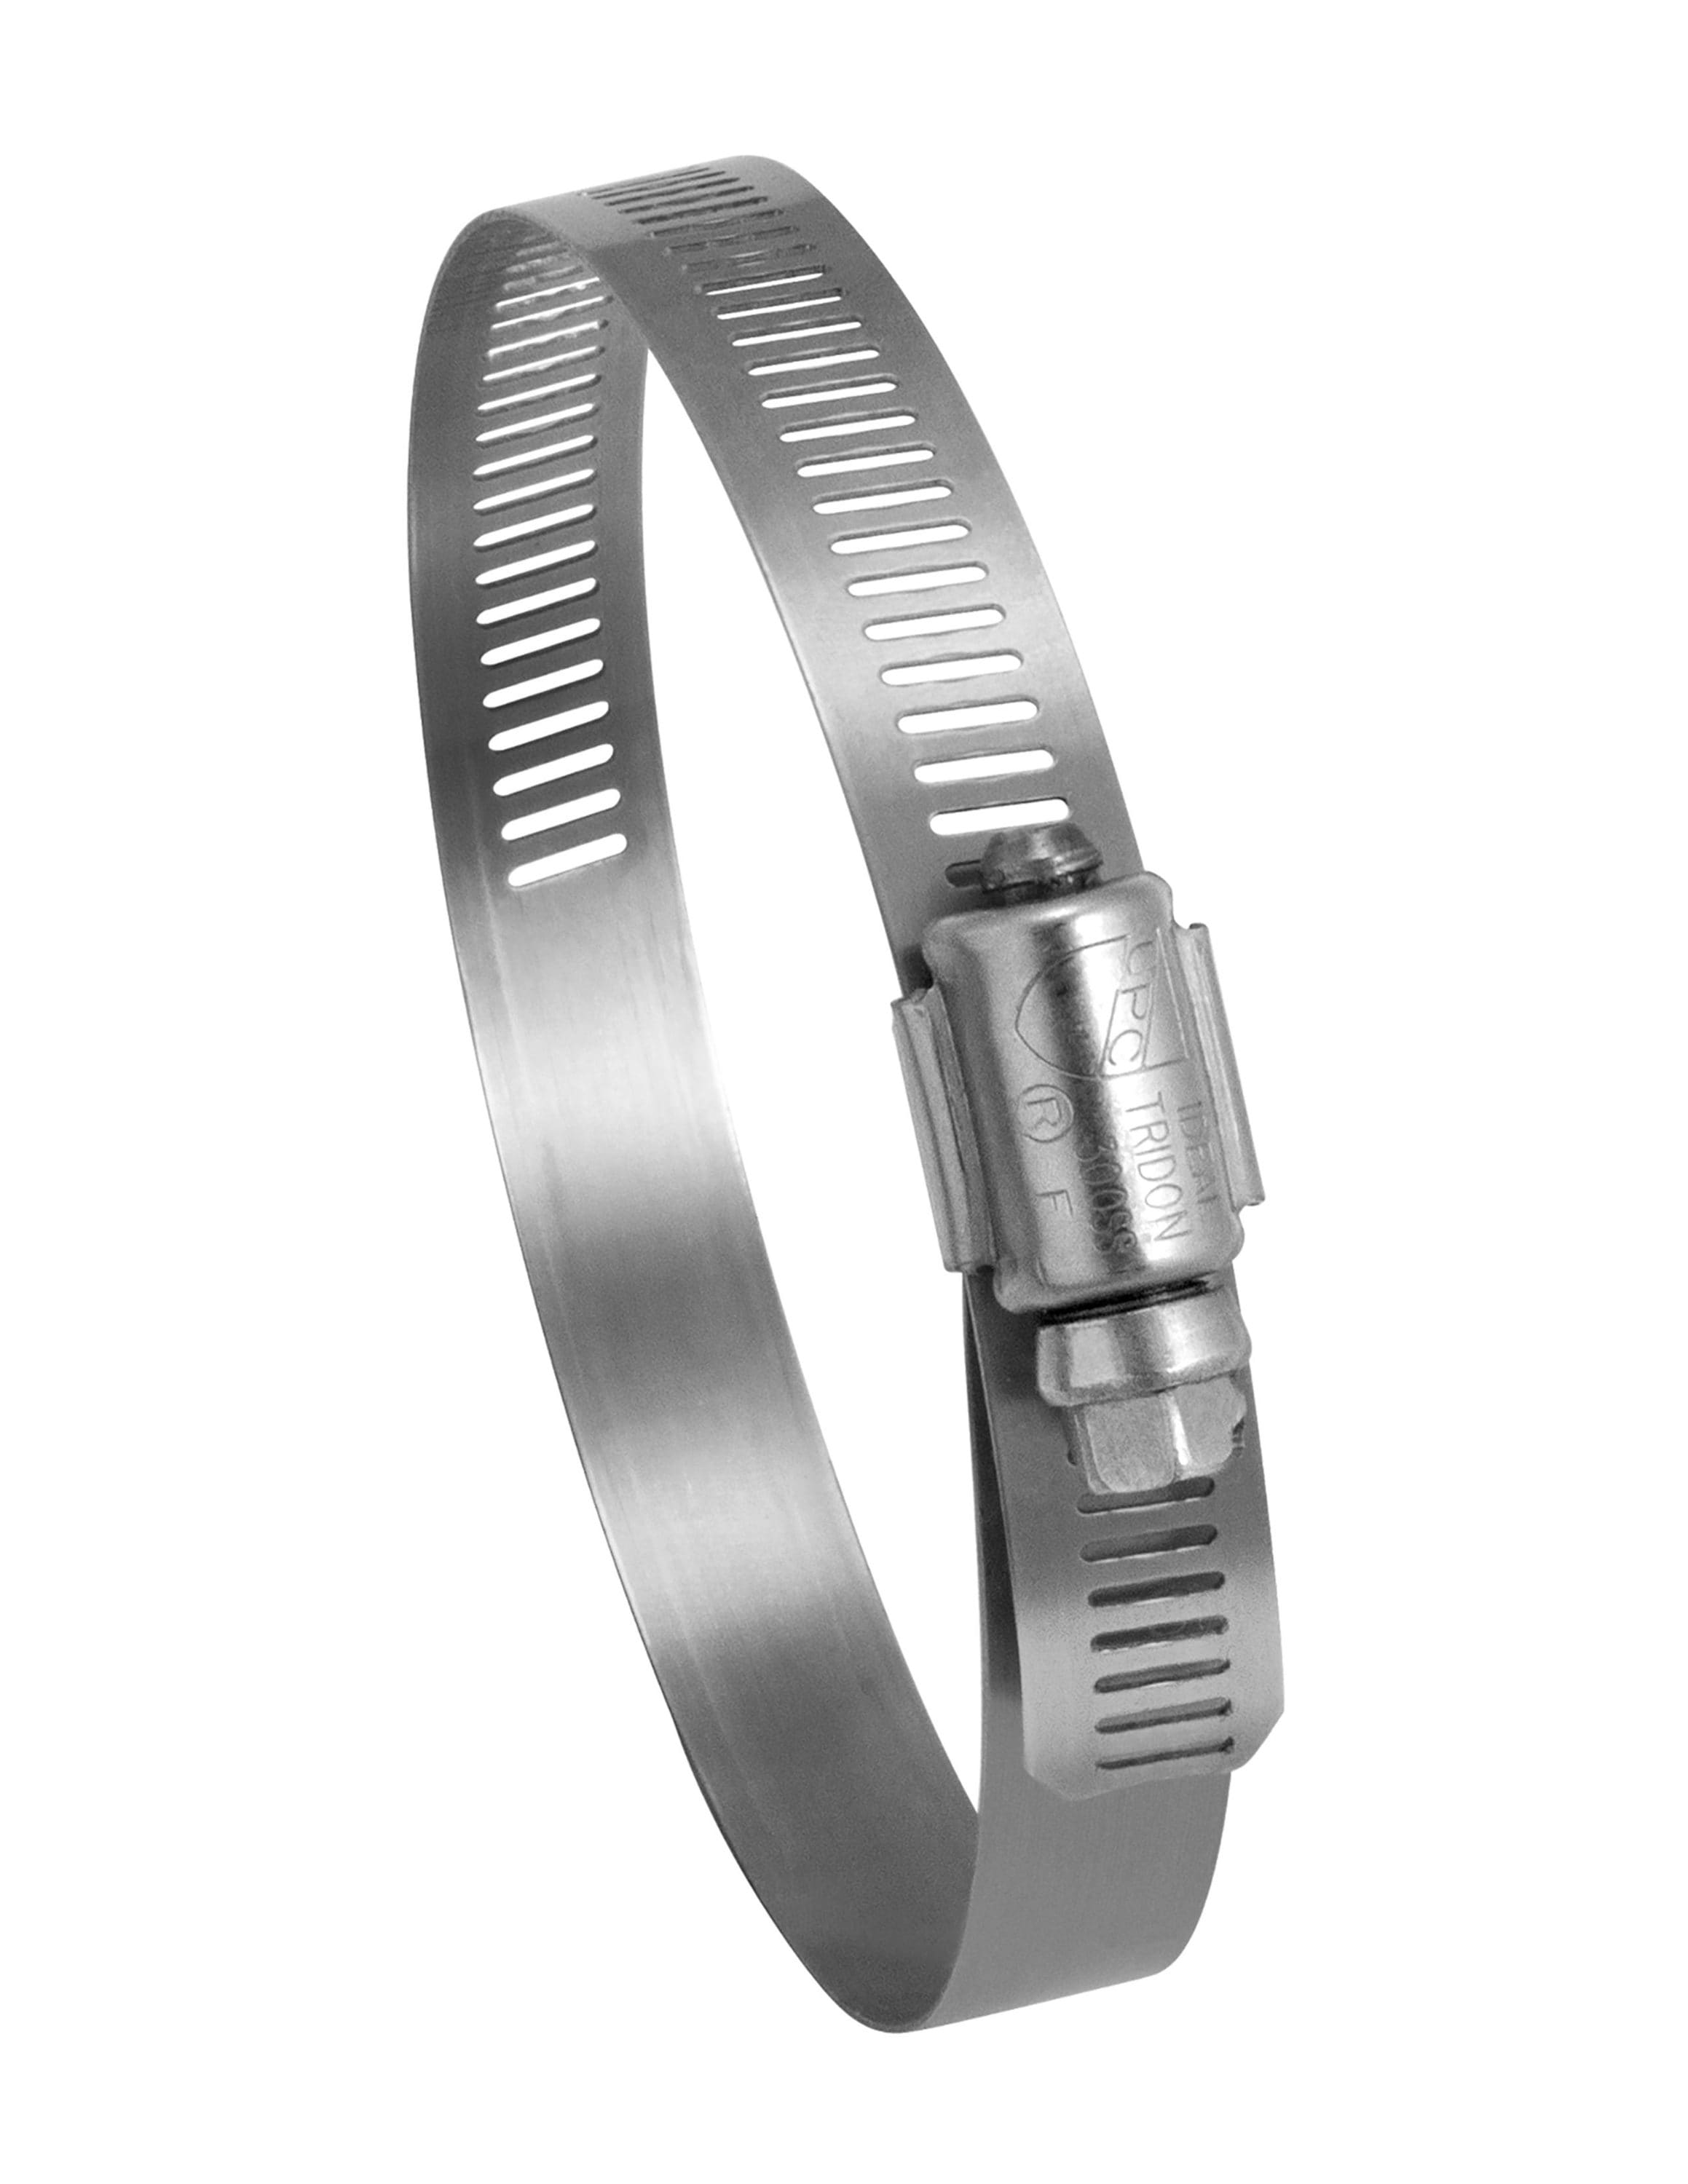 IDEAL-TRIDON 2-in to 4-in dia Stainless Steel Adjustable Clamp